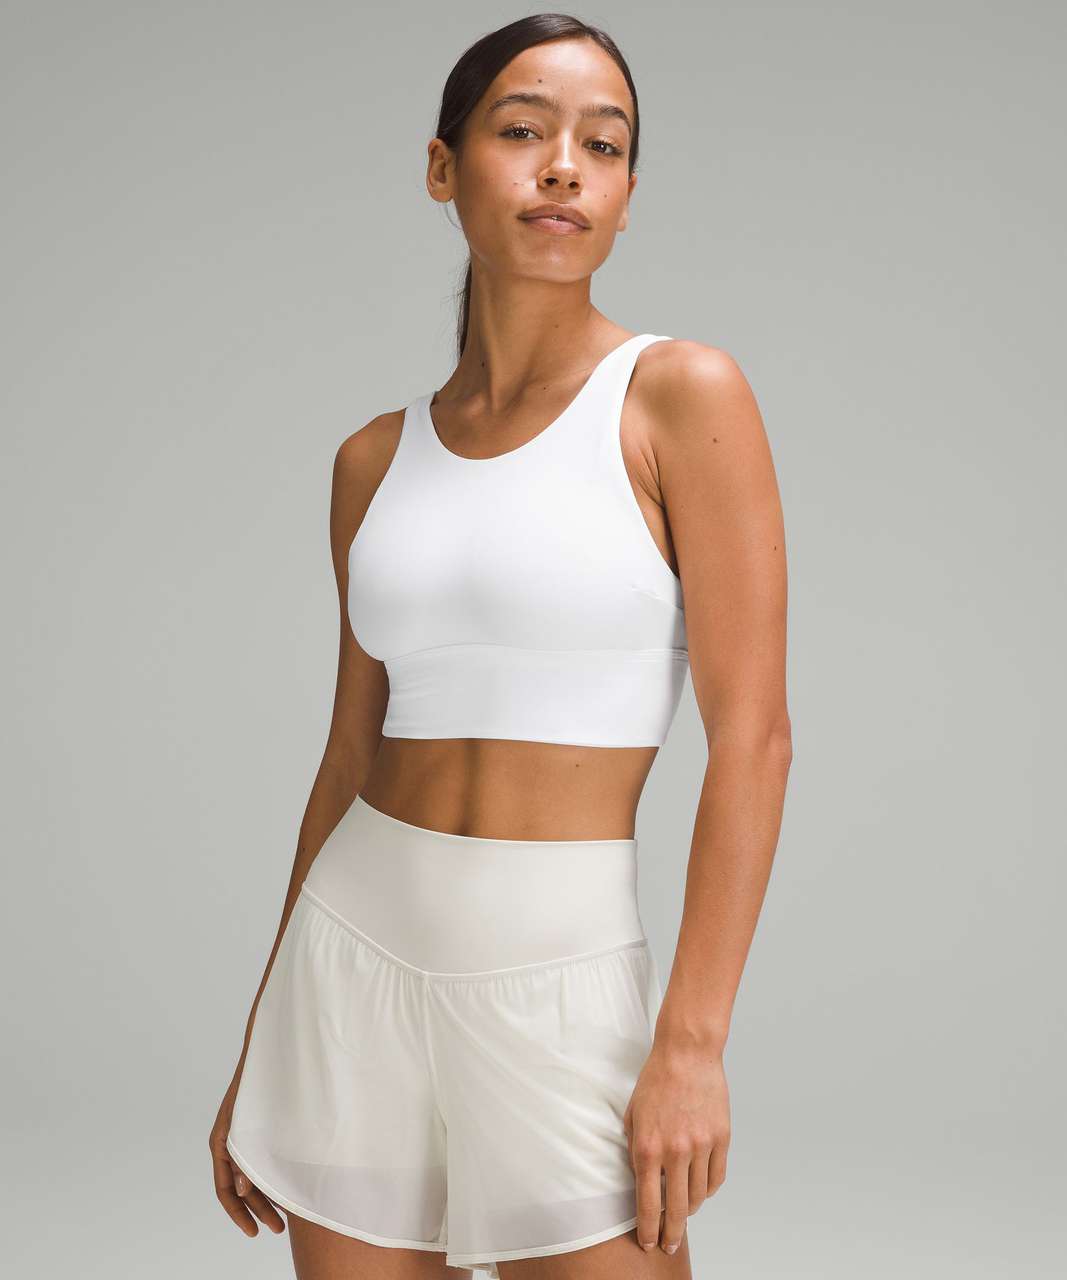 LOOKING FOR INSIGHT ON WHITE SPORTS BRAS : r/lululemon